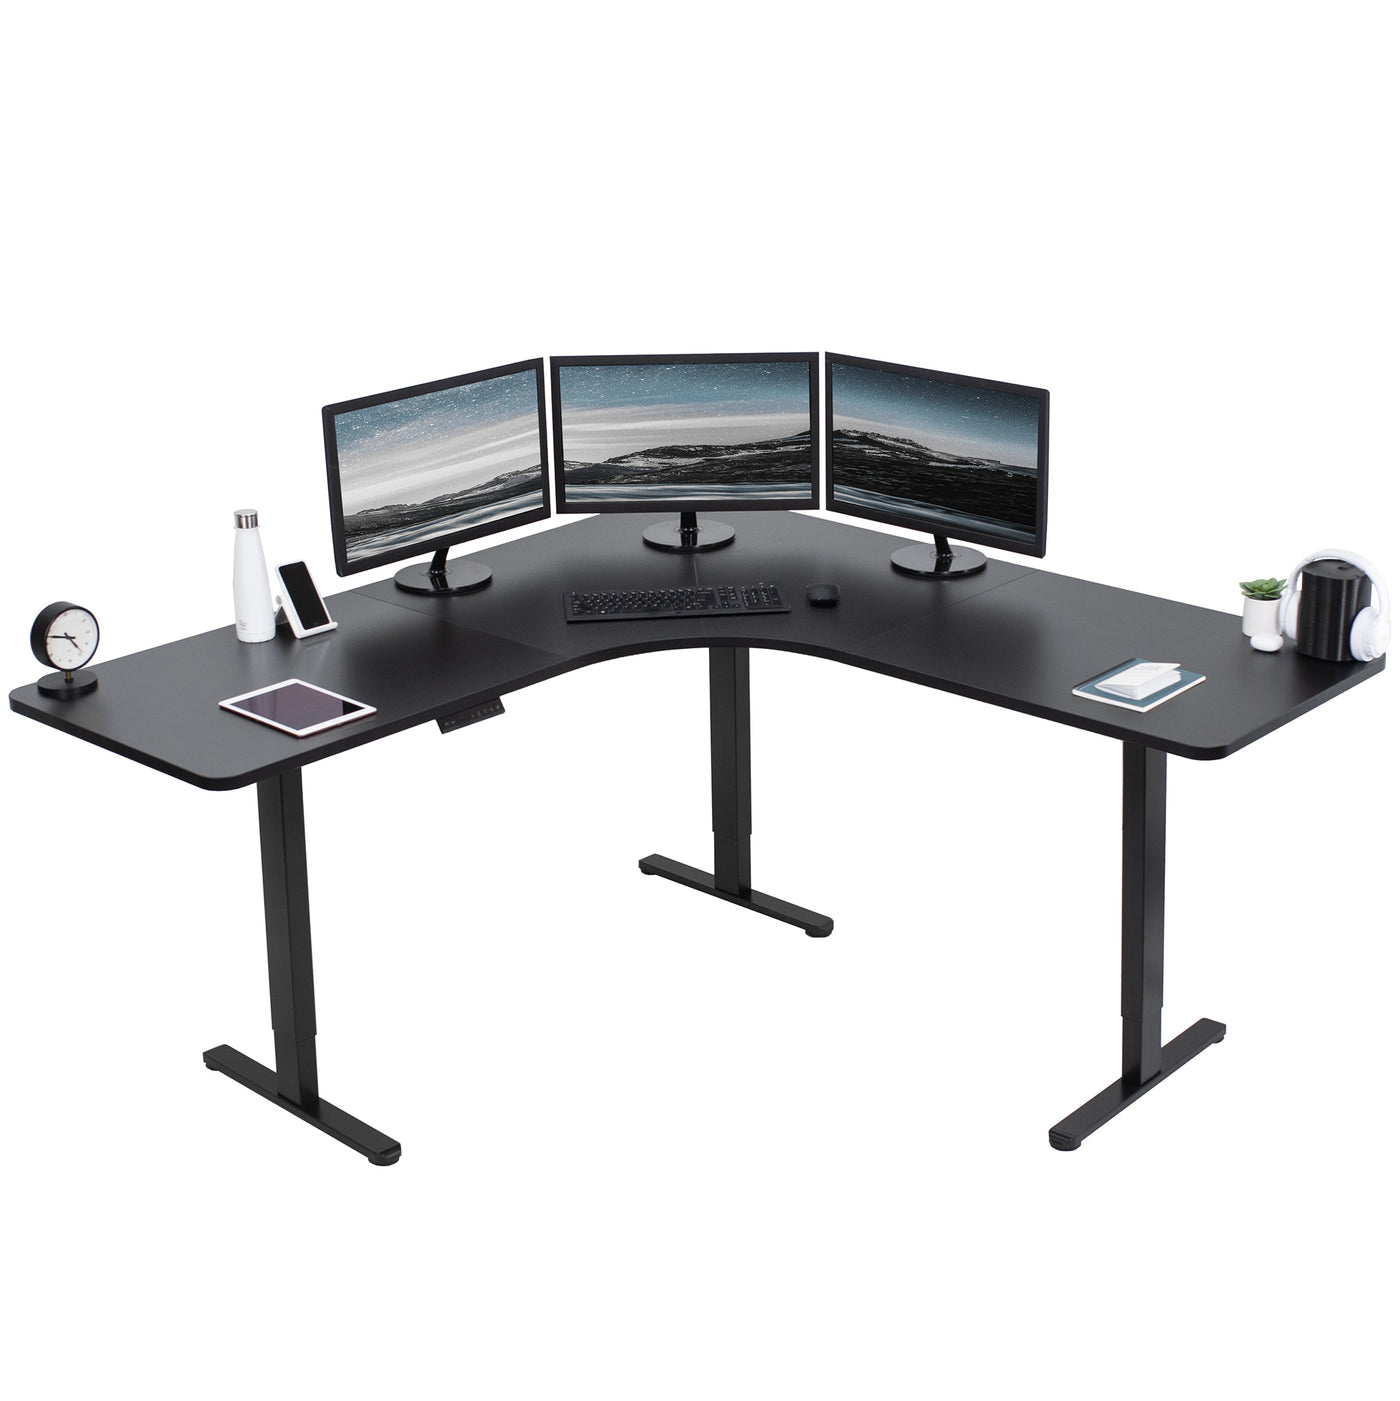 Large heavy-duty electric height adjustable desk.